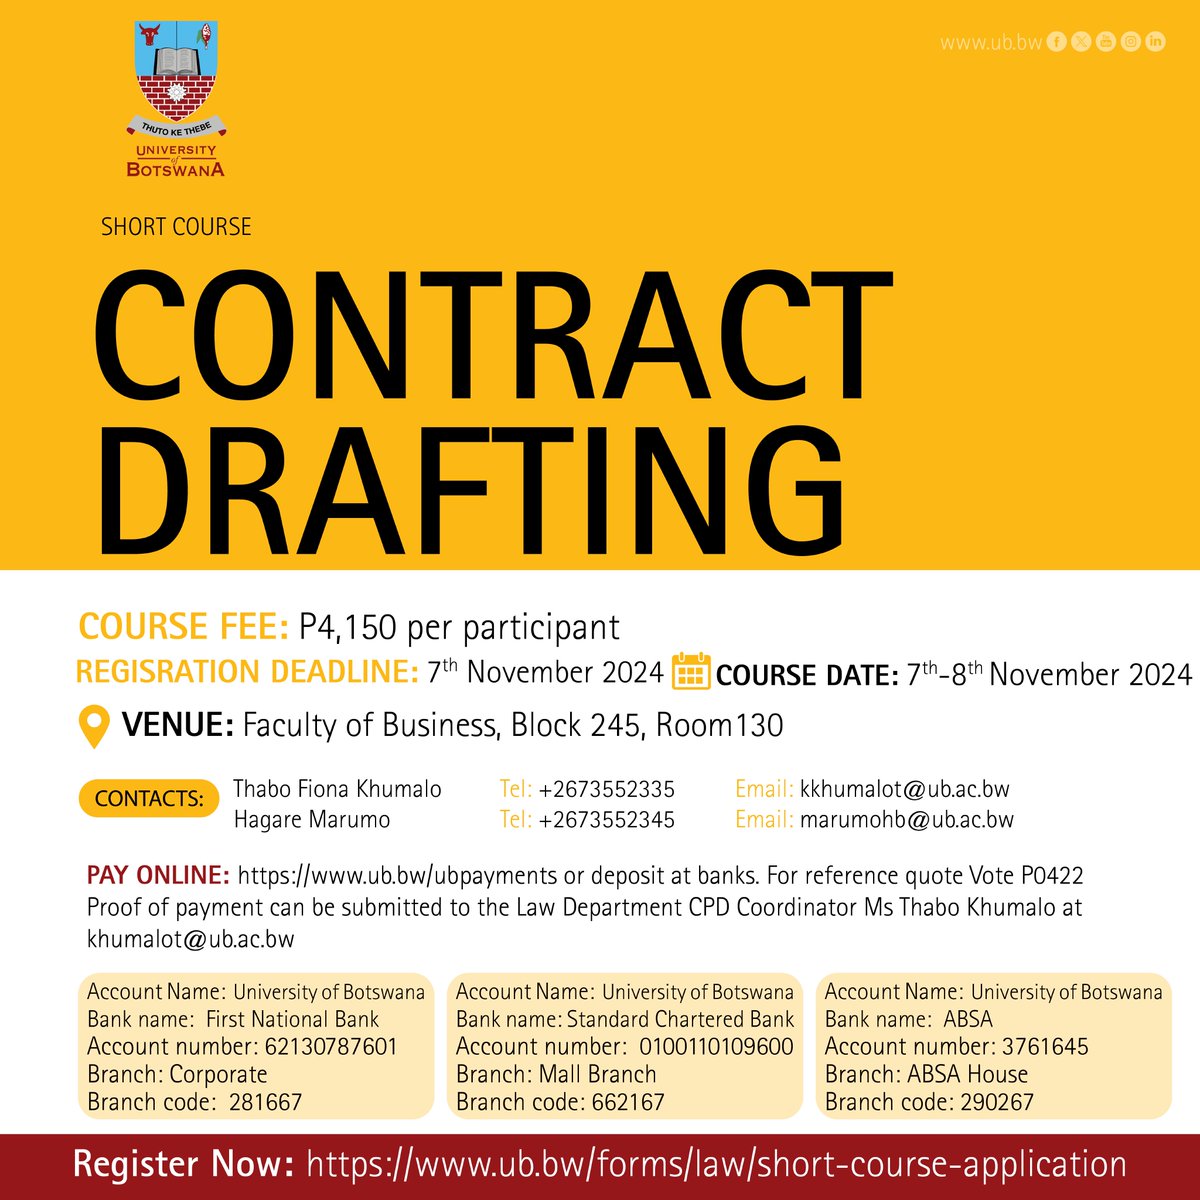 #ShortCourse
Contract Drafting
Register Now: ub.bw/forms/law/shor…